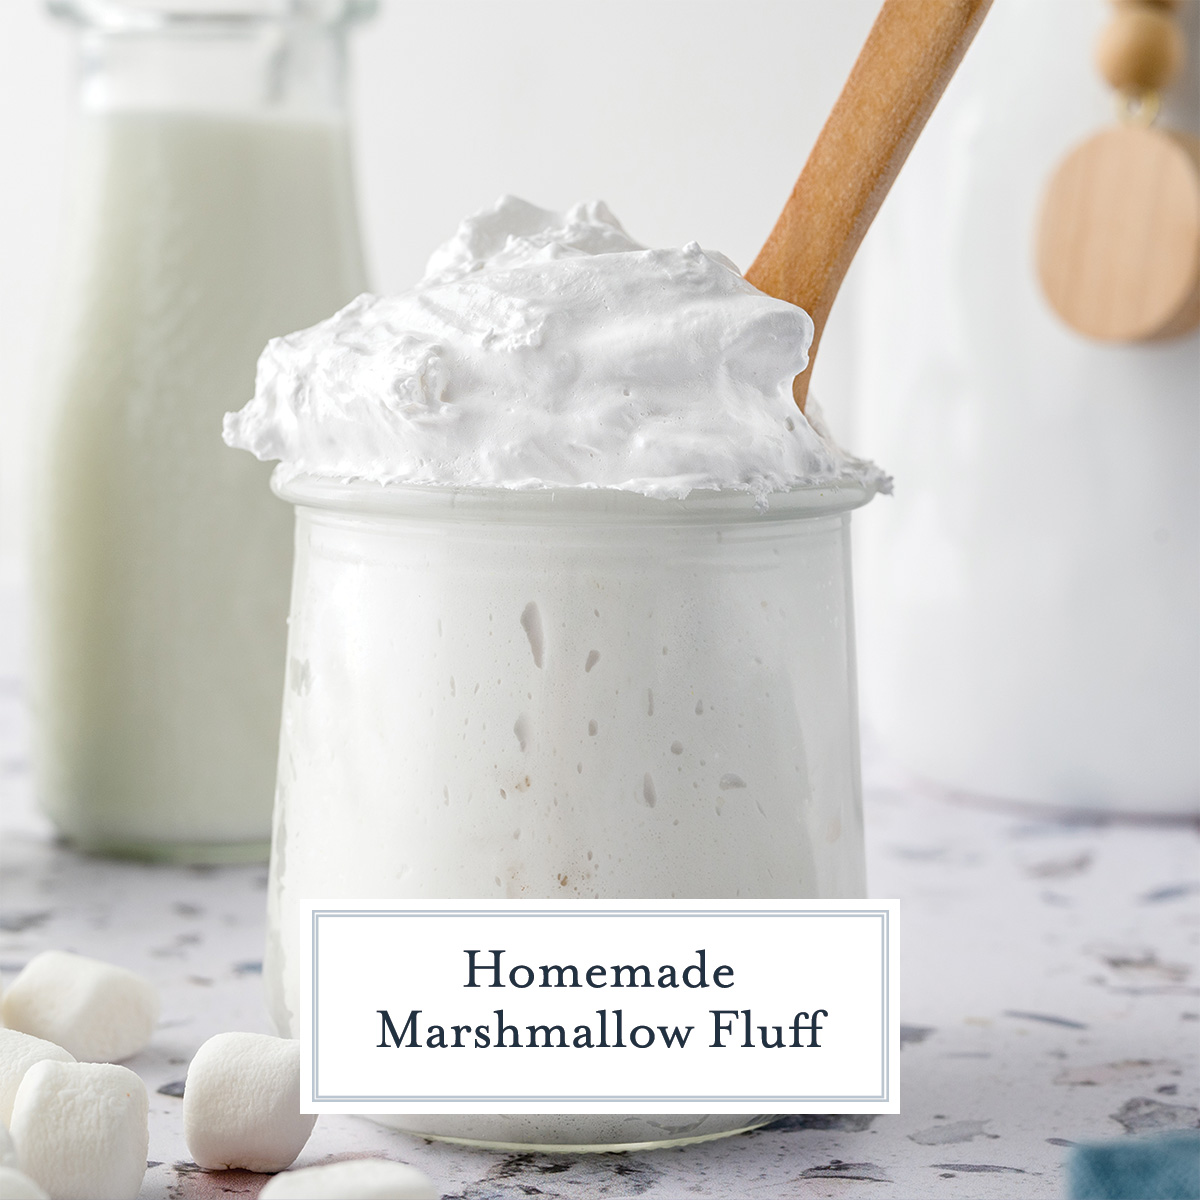 Are Marshmallow Fluff and Marshmallow Creme the Same thing